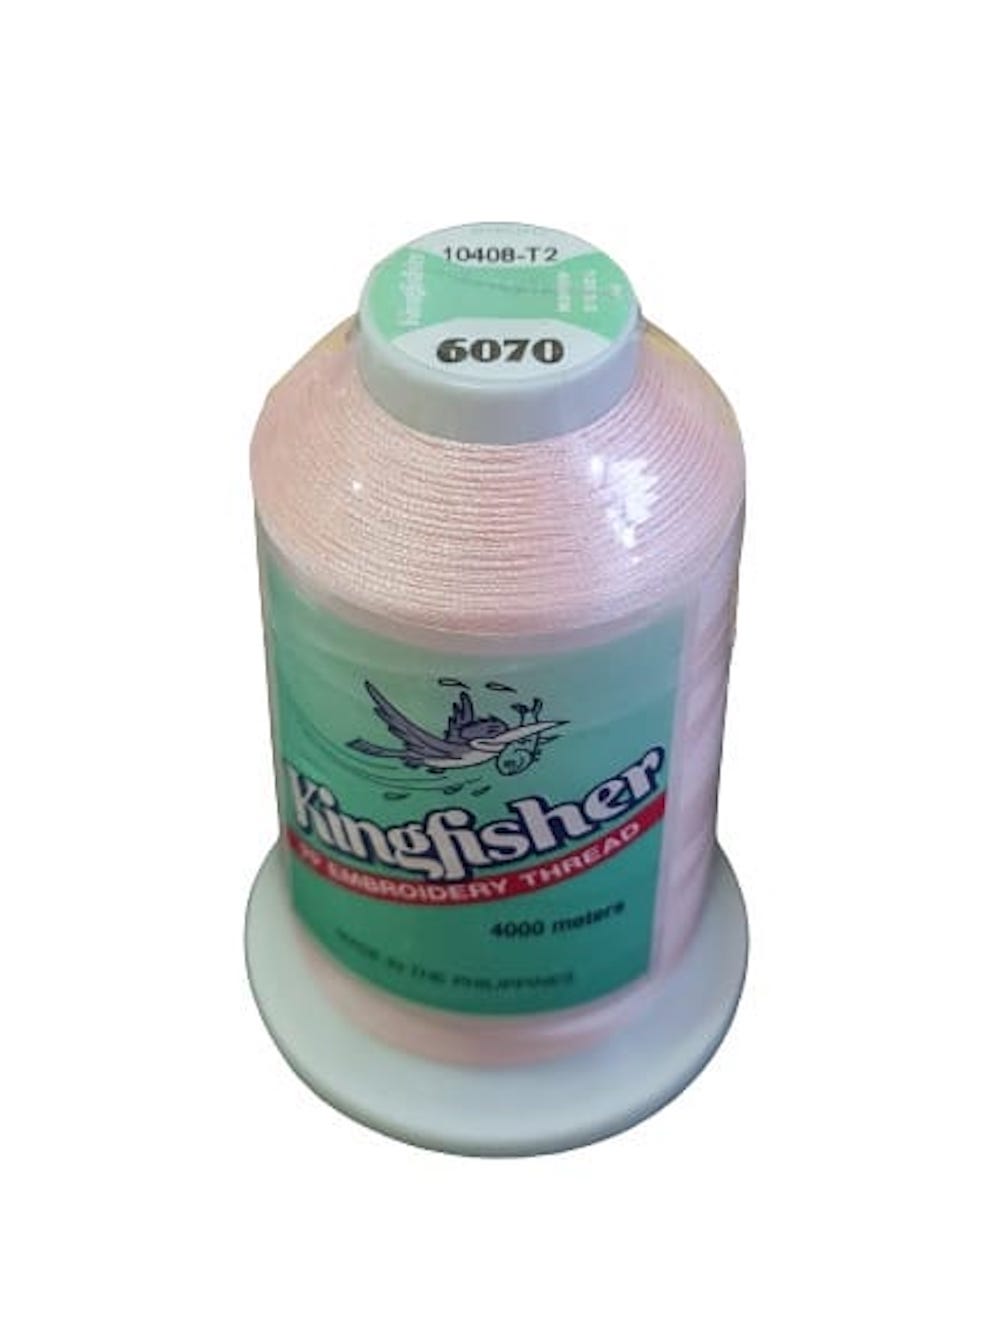 King Fisher Embroidery Thread 4000m 6070 - MY SEWING MALL